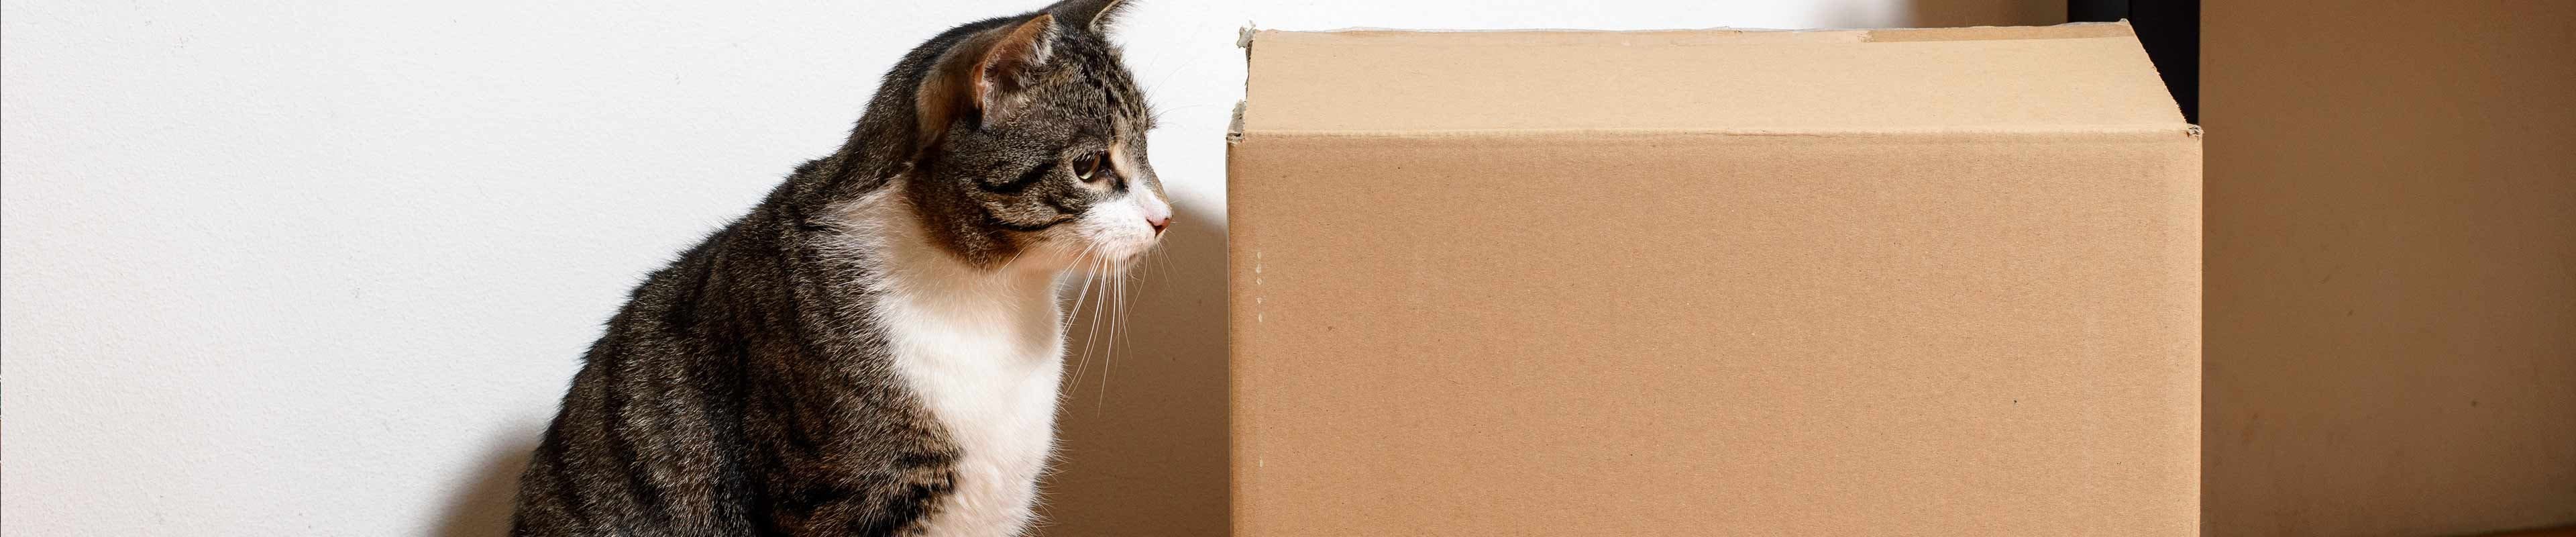 A cat looks at a packed box in its owners new home after the big move.